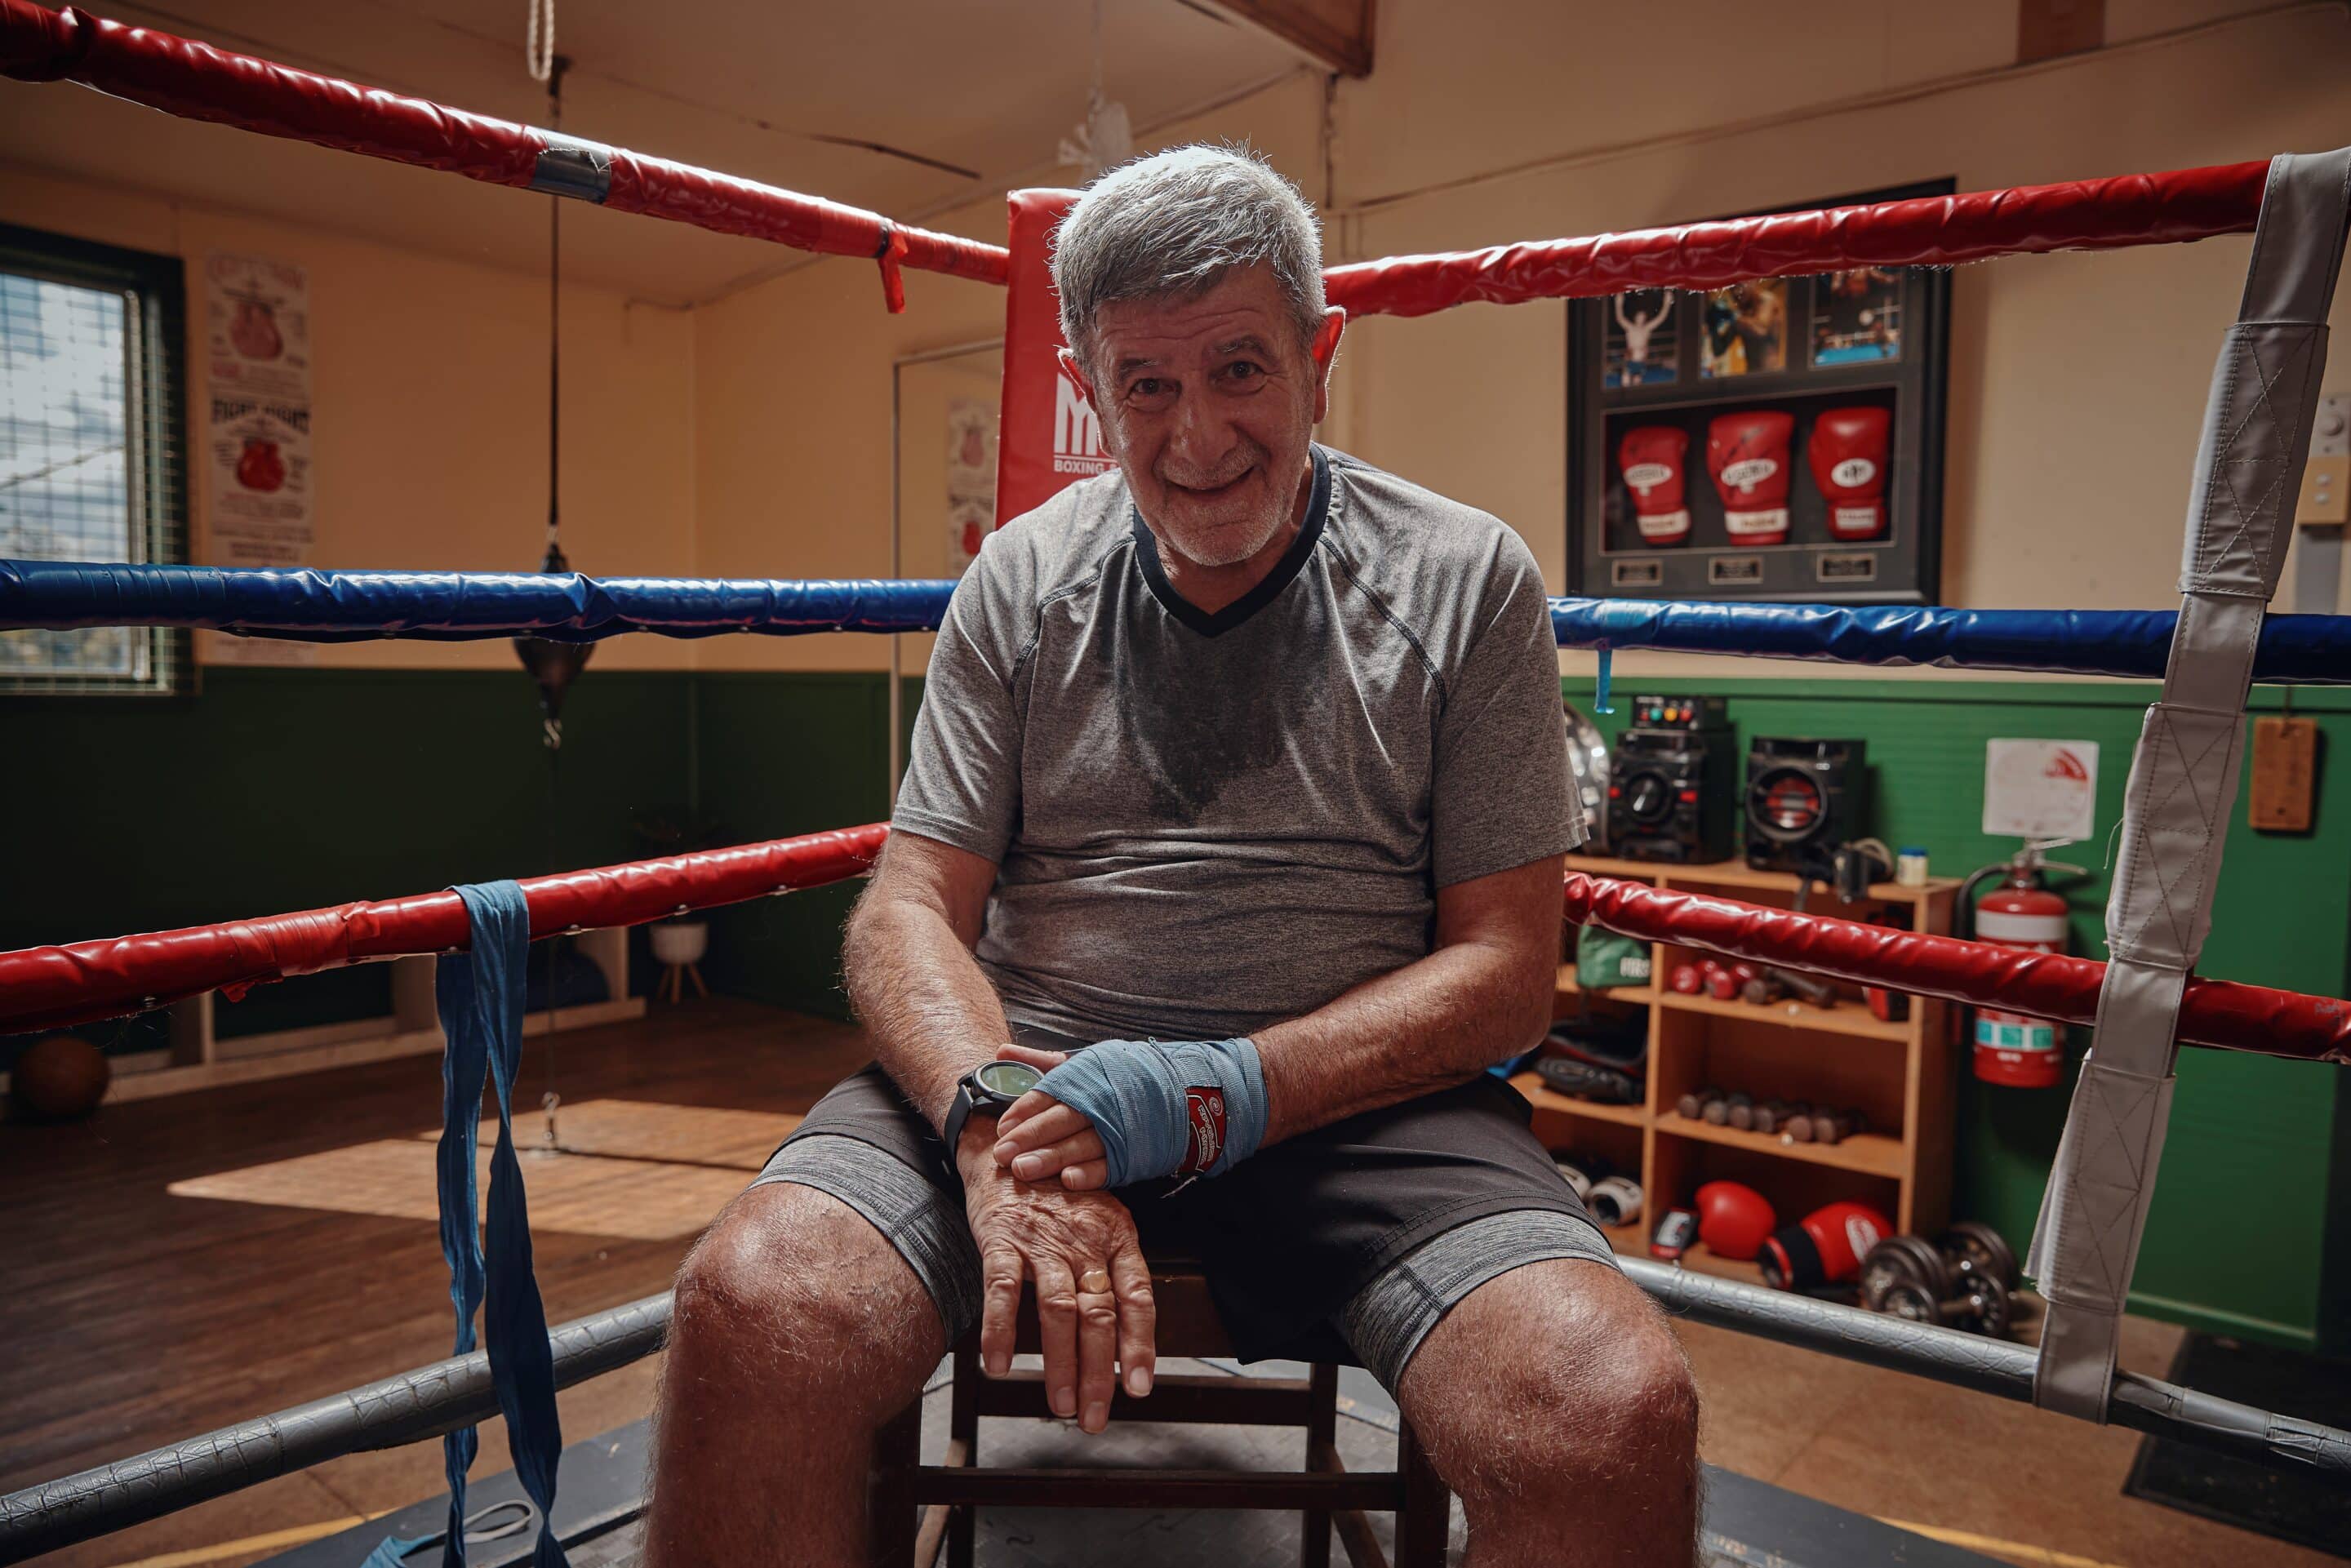 Feros Care client Darryl Ferney sitting in a boxing ring